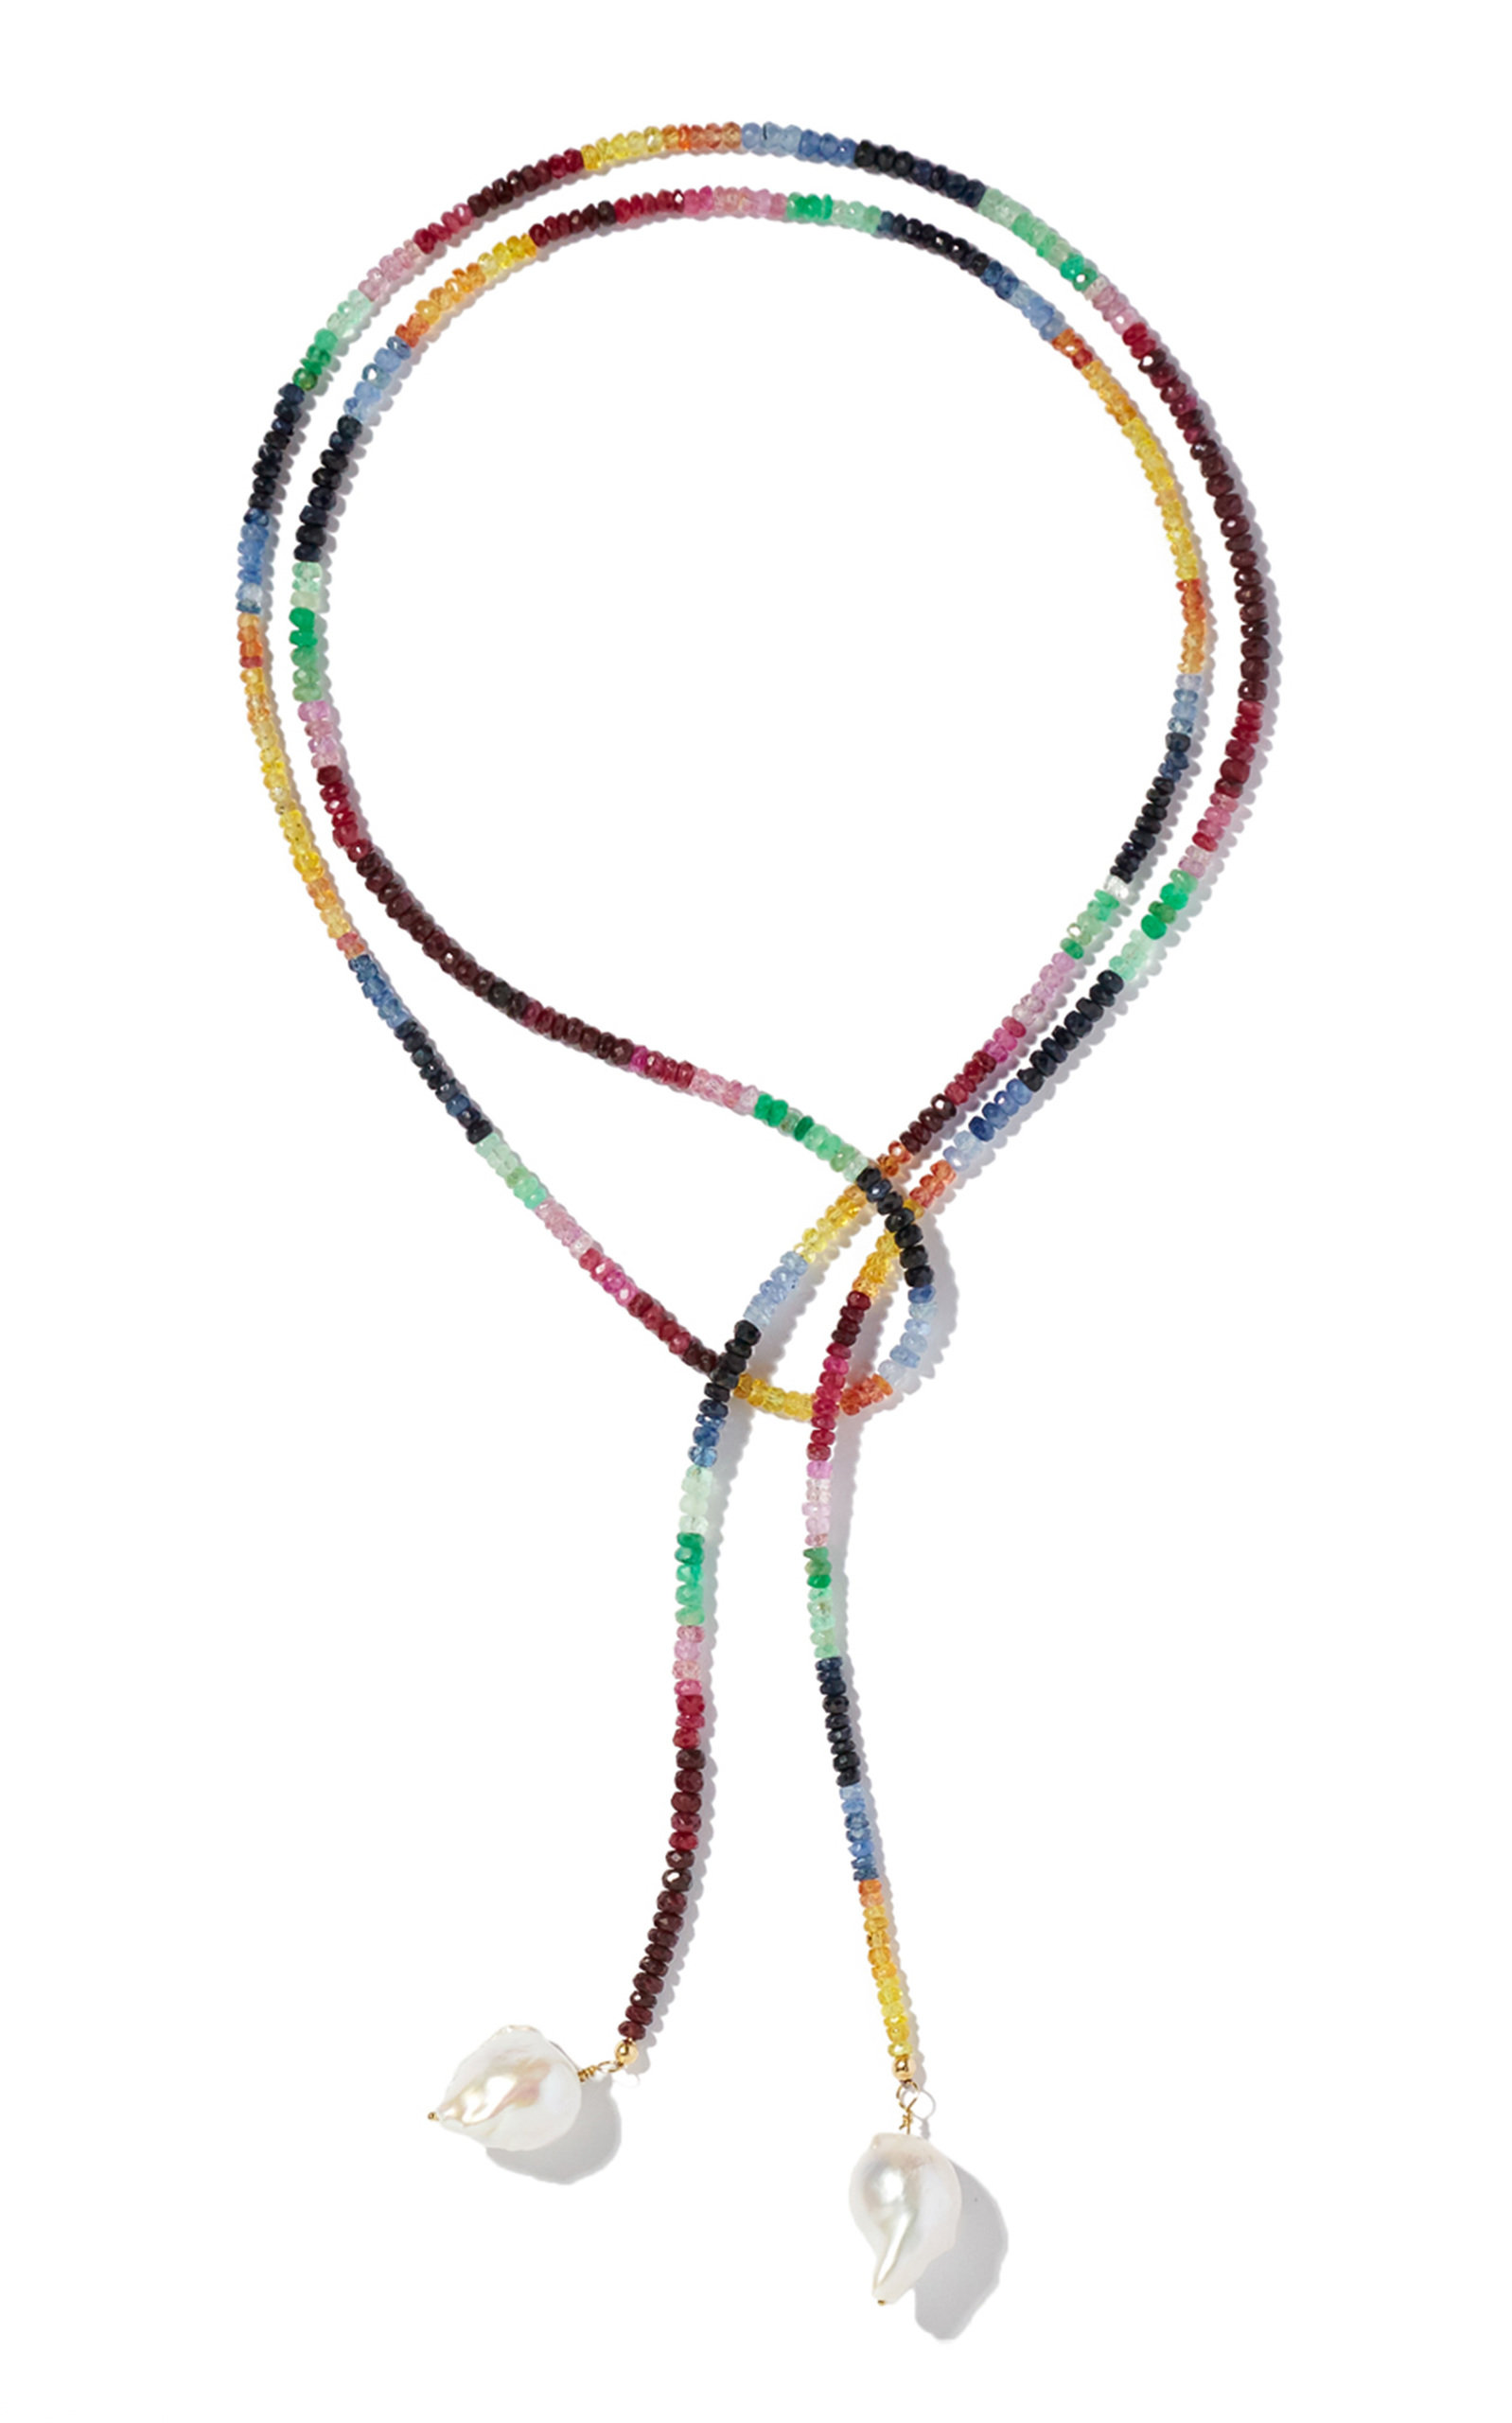 14K Yellow Gold Ruby; Emerald and Sapphire Lariat Necklace